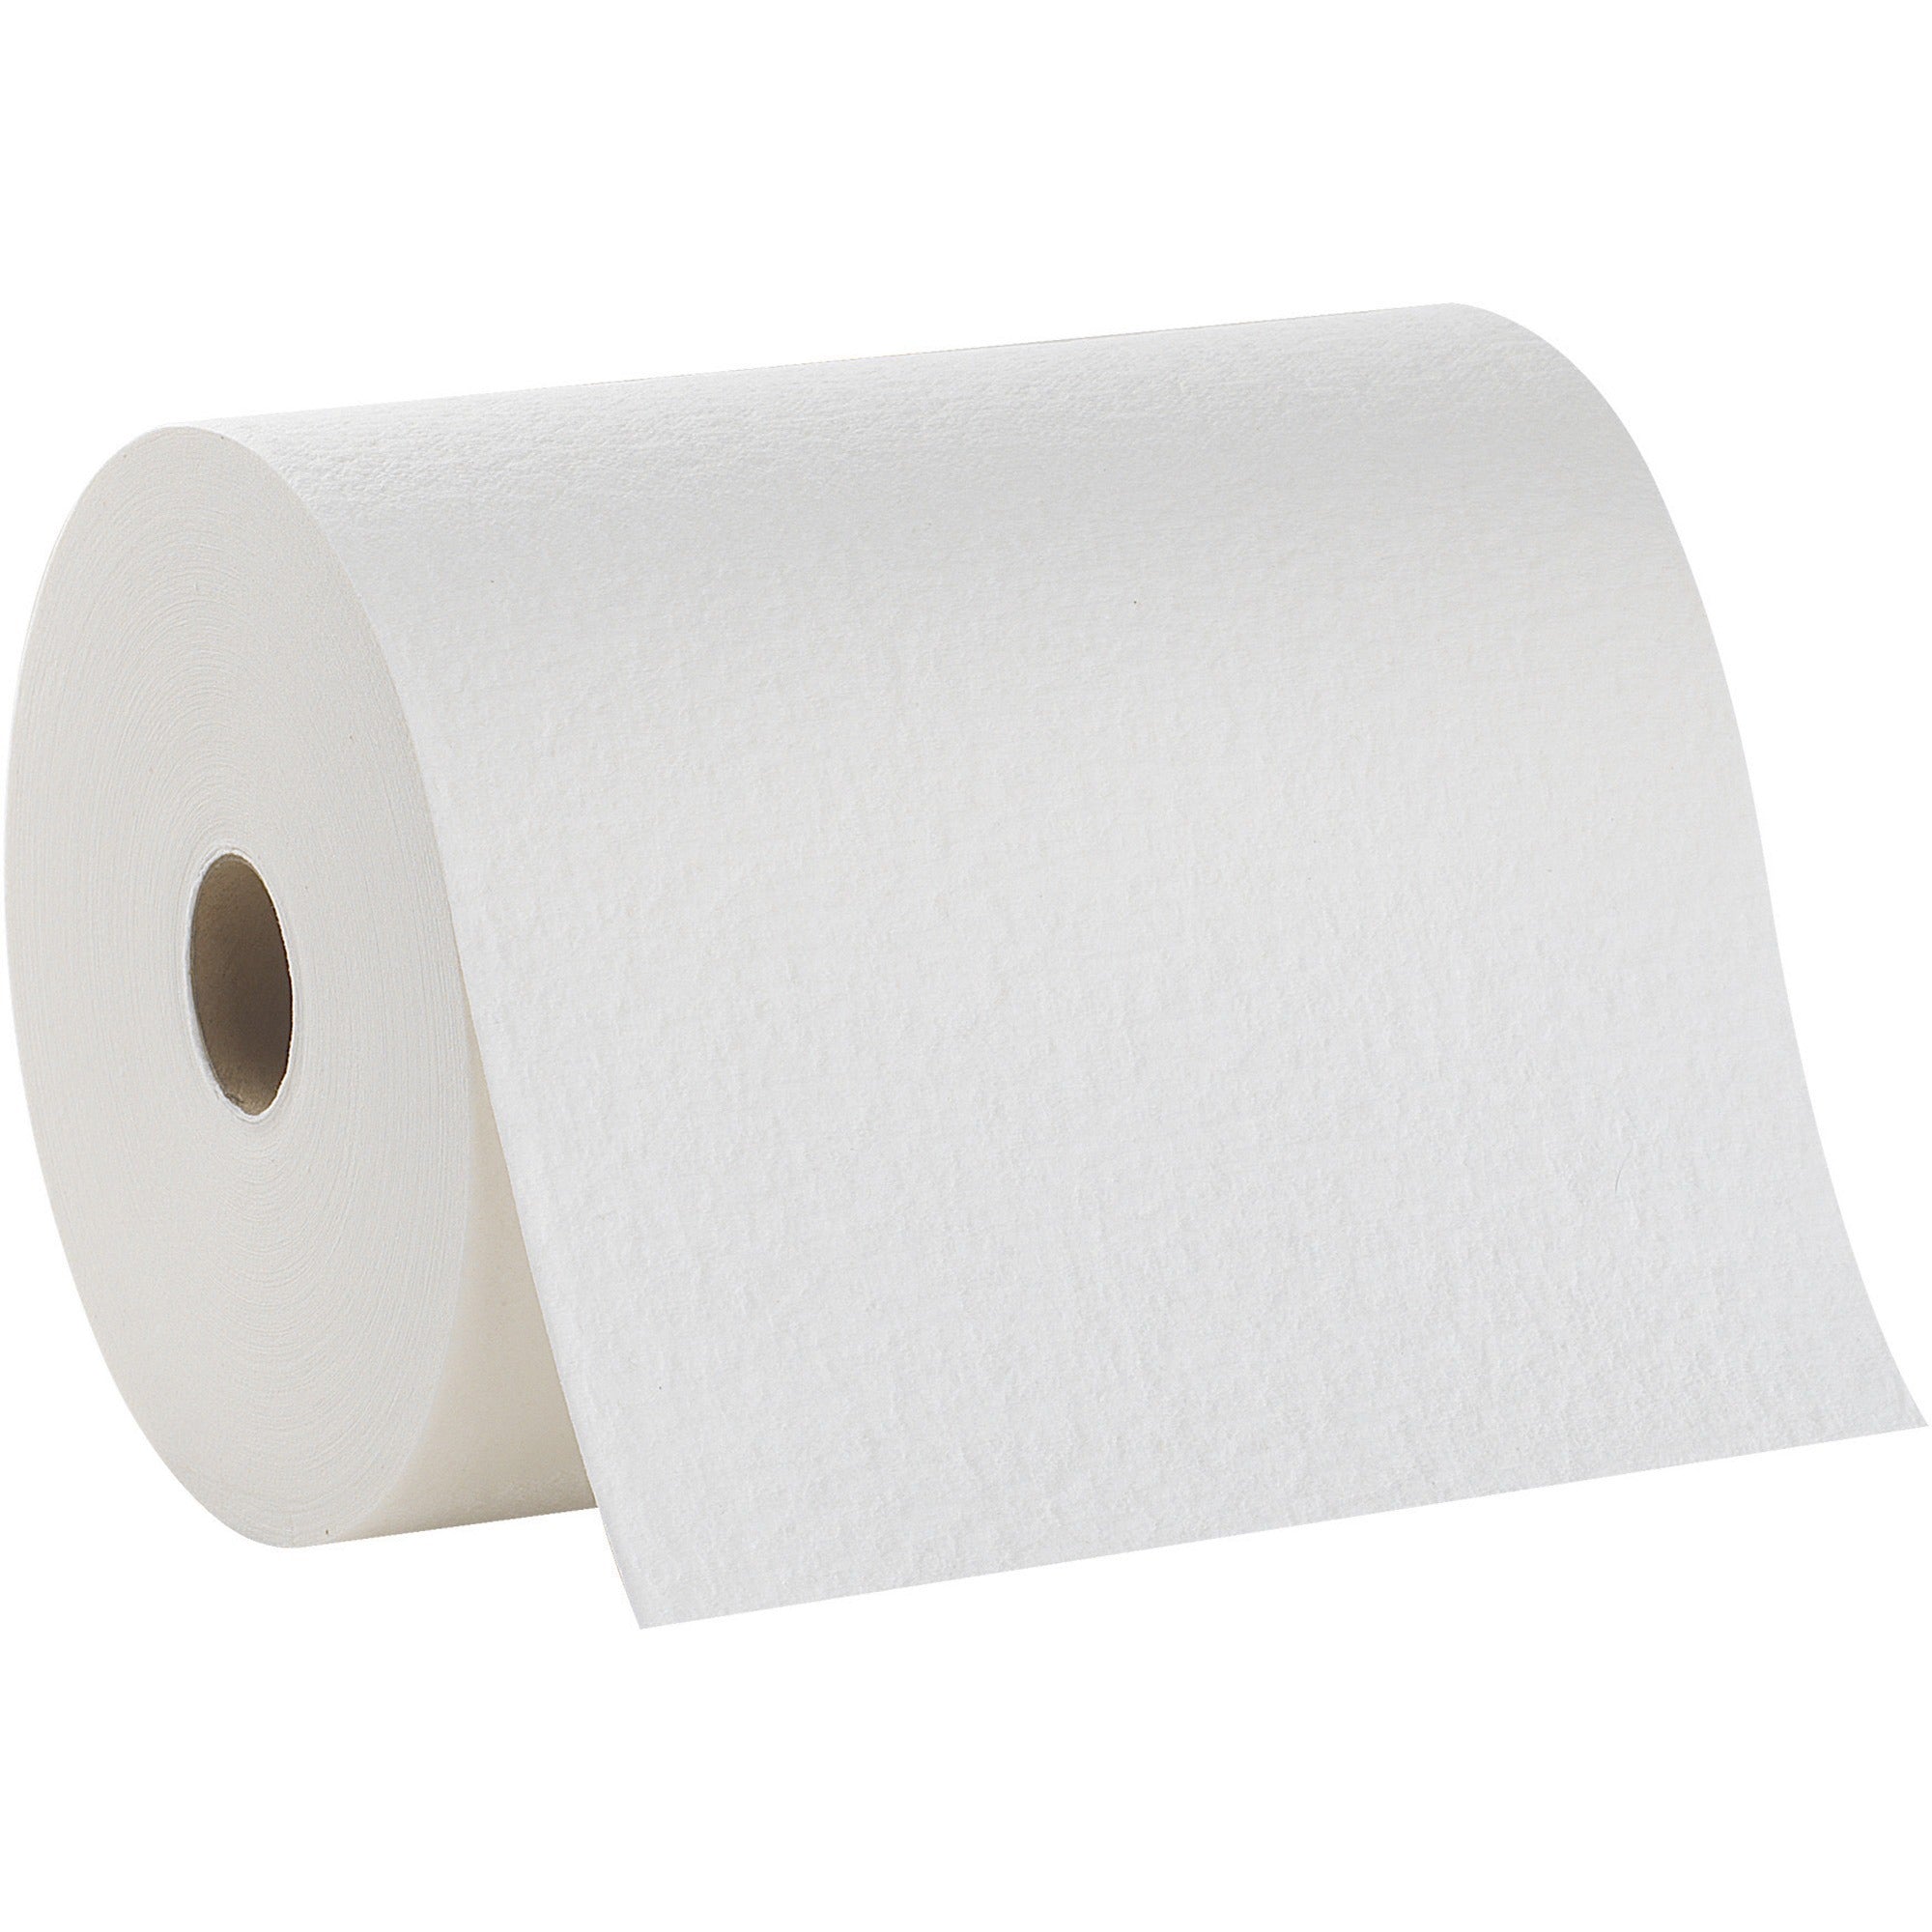 brawny-professional-d400-disposable-shop-towel-refills-990-x-13-250-sheets-roll-white-cellulose-disposable-absorbent-strong-soft-reusable-6-rolls-per-carton-1-carton_gpc20065 - 1